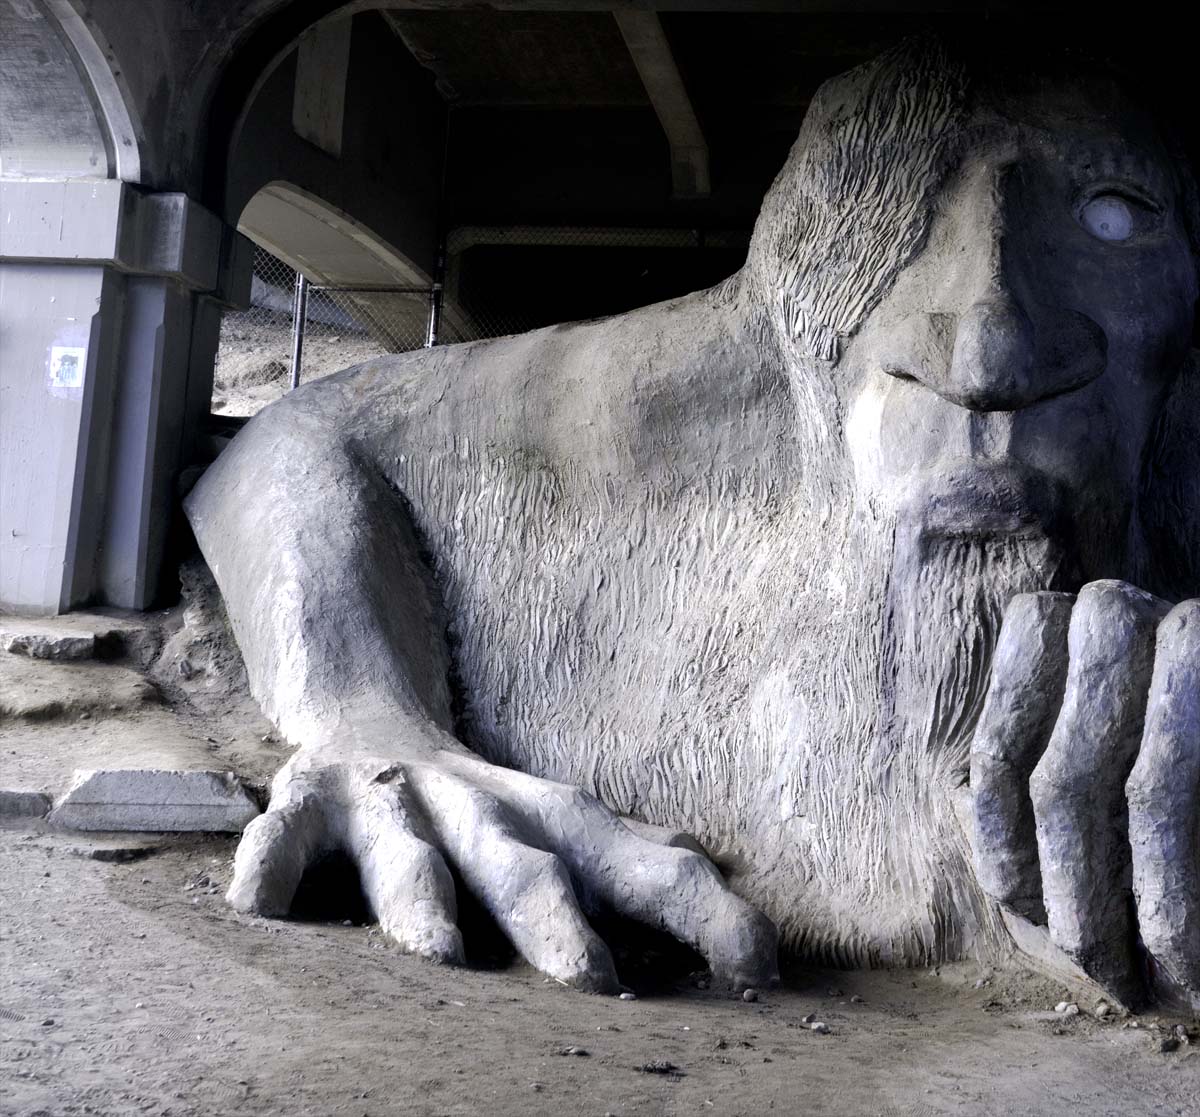 Fremont Troll sculpture, one of top things to do in Fremont, Seattle